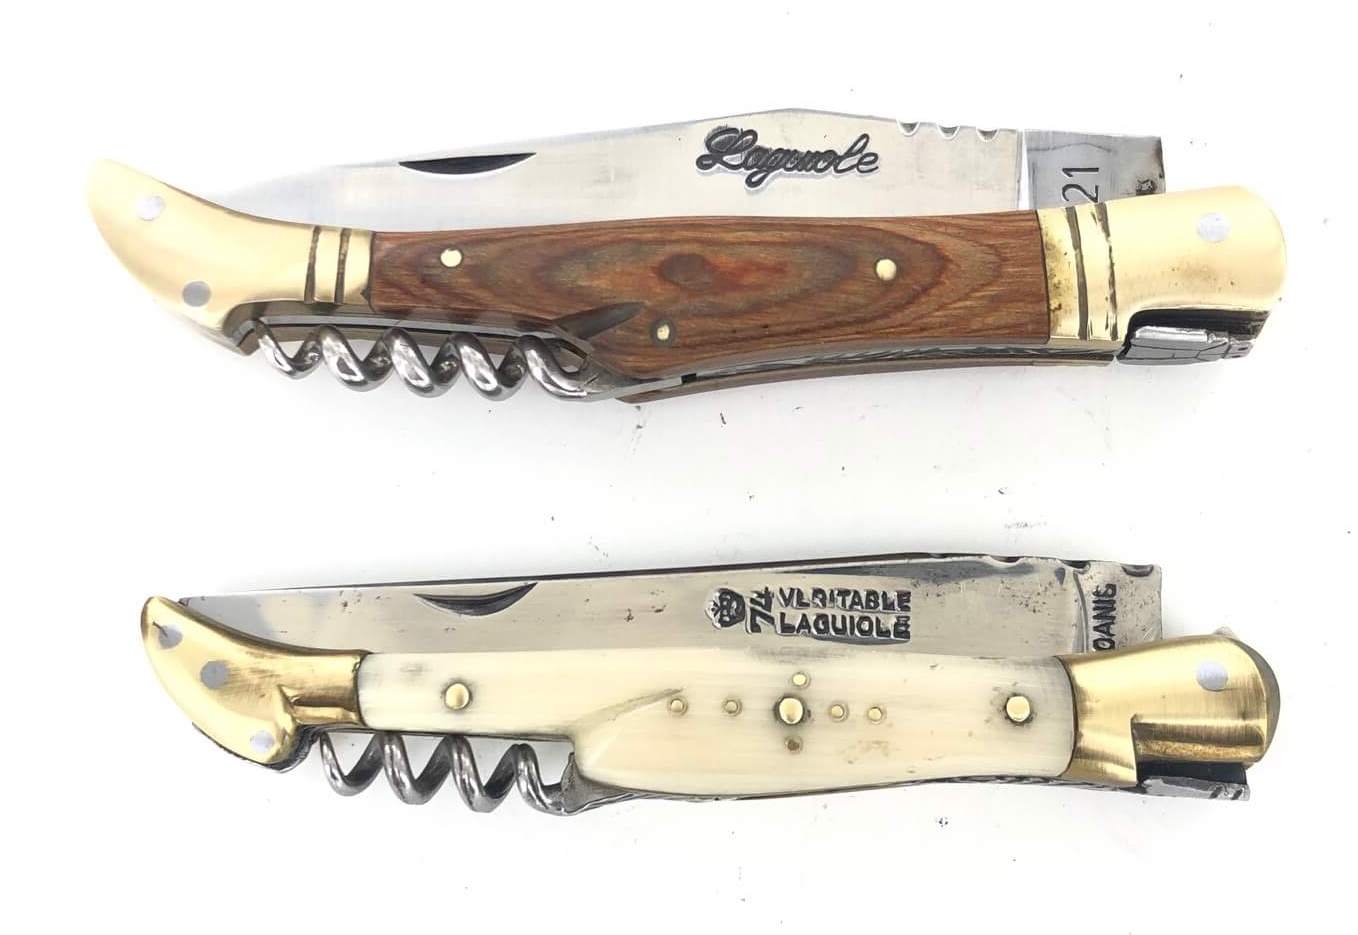 How to recognize a genuine Laguiole knife